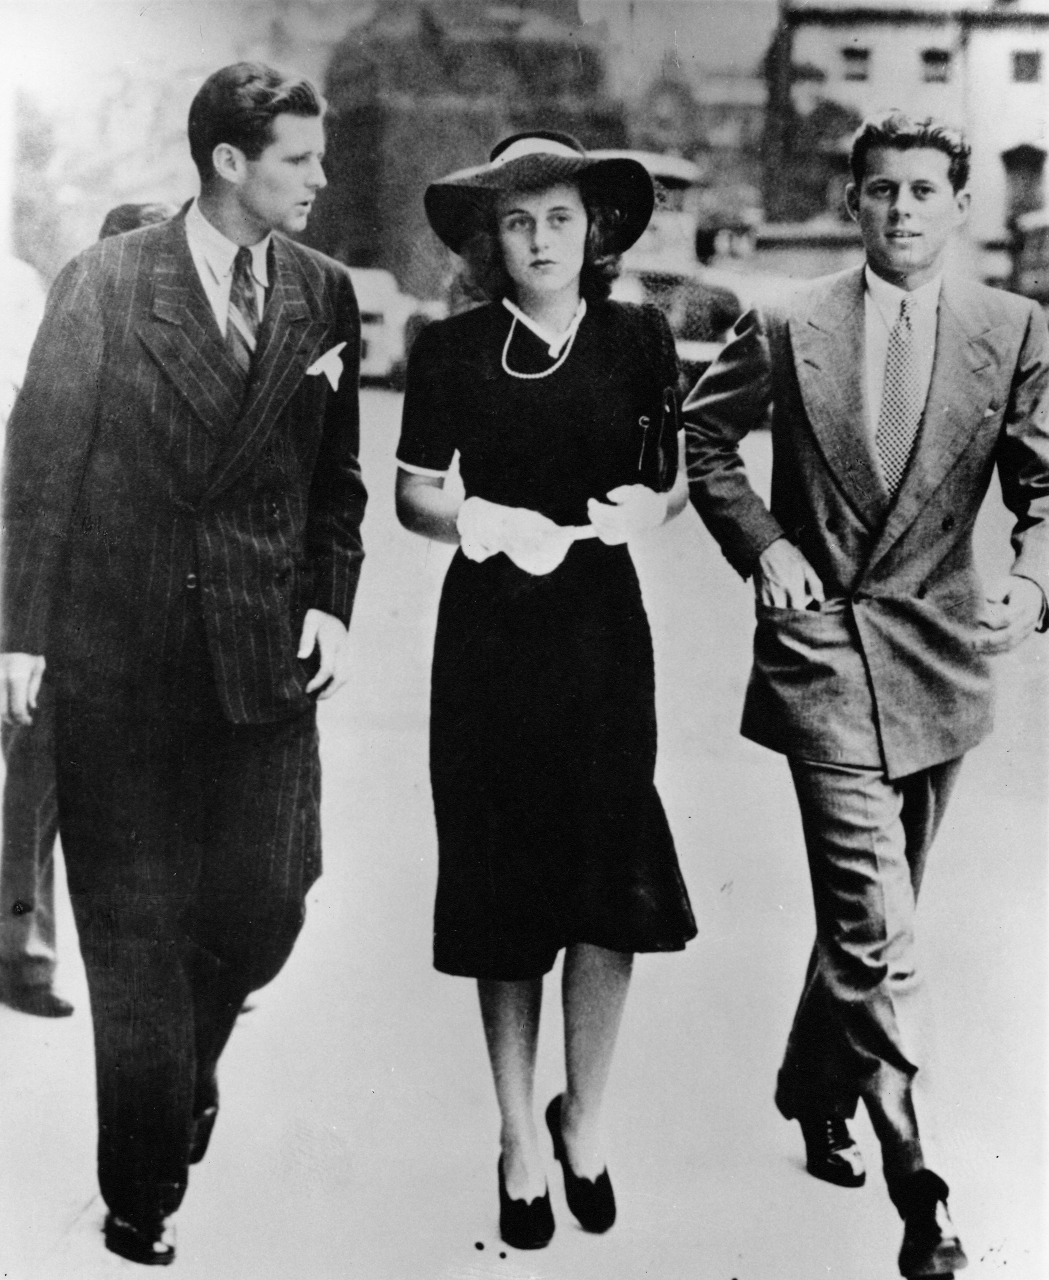 A black and white photo of a young woman in a hat, dress and gloves walking between two young men in suits on a city street. The man at left speaks, turned toward the woman, who looks ahead nervously. The man at right faces the viewer.